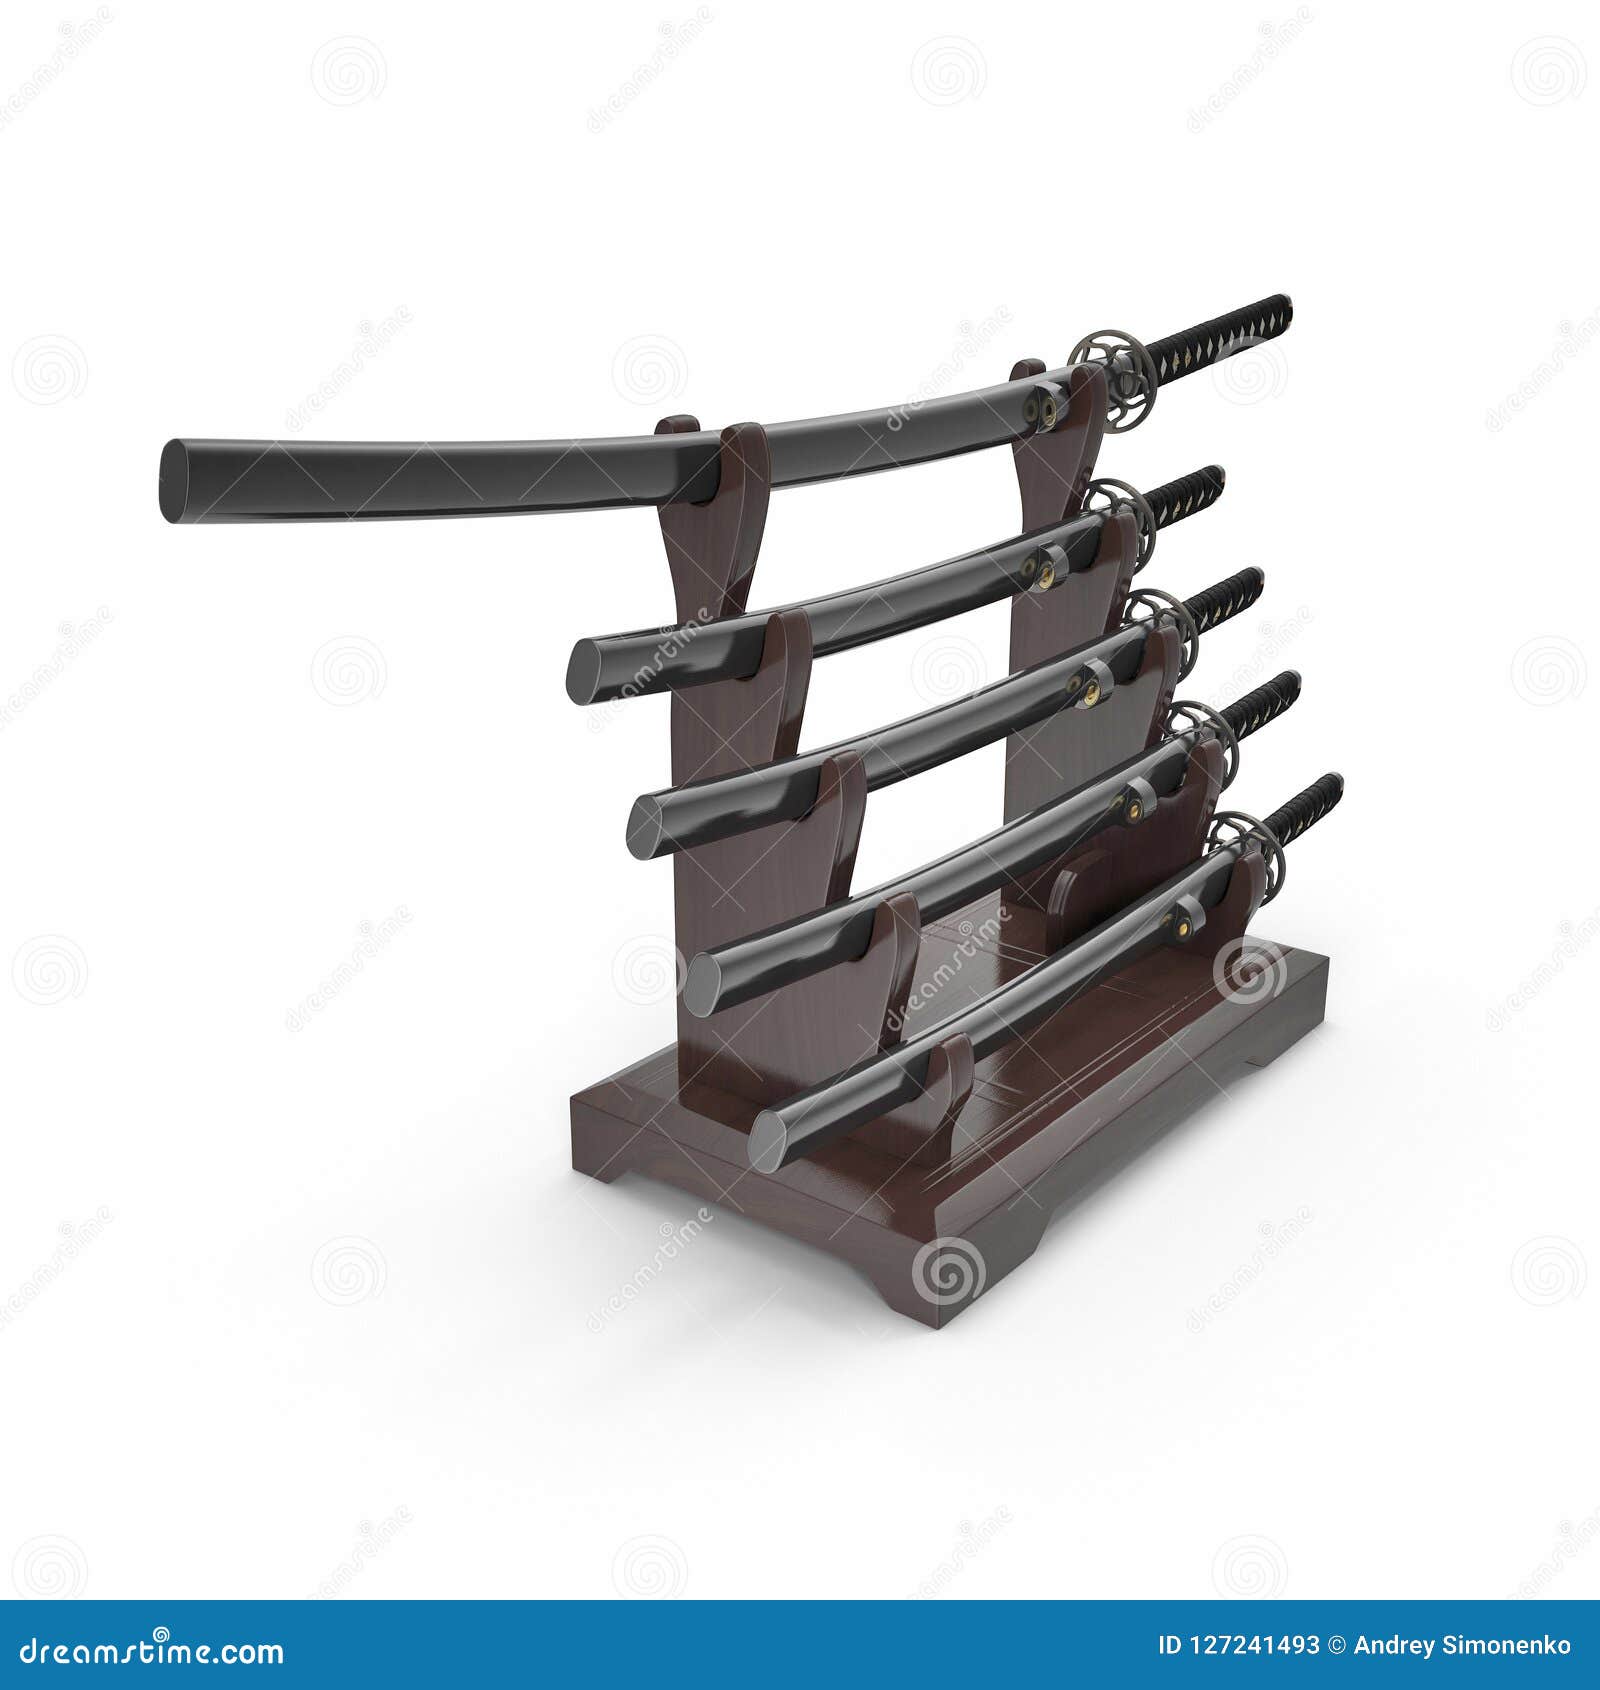 Details about   WOODEN JAPANESE SWORD KATANA 刀 DISPLAY STAND 